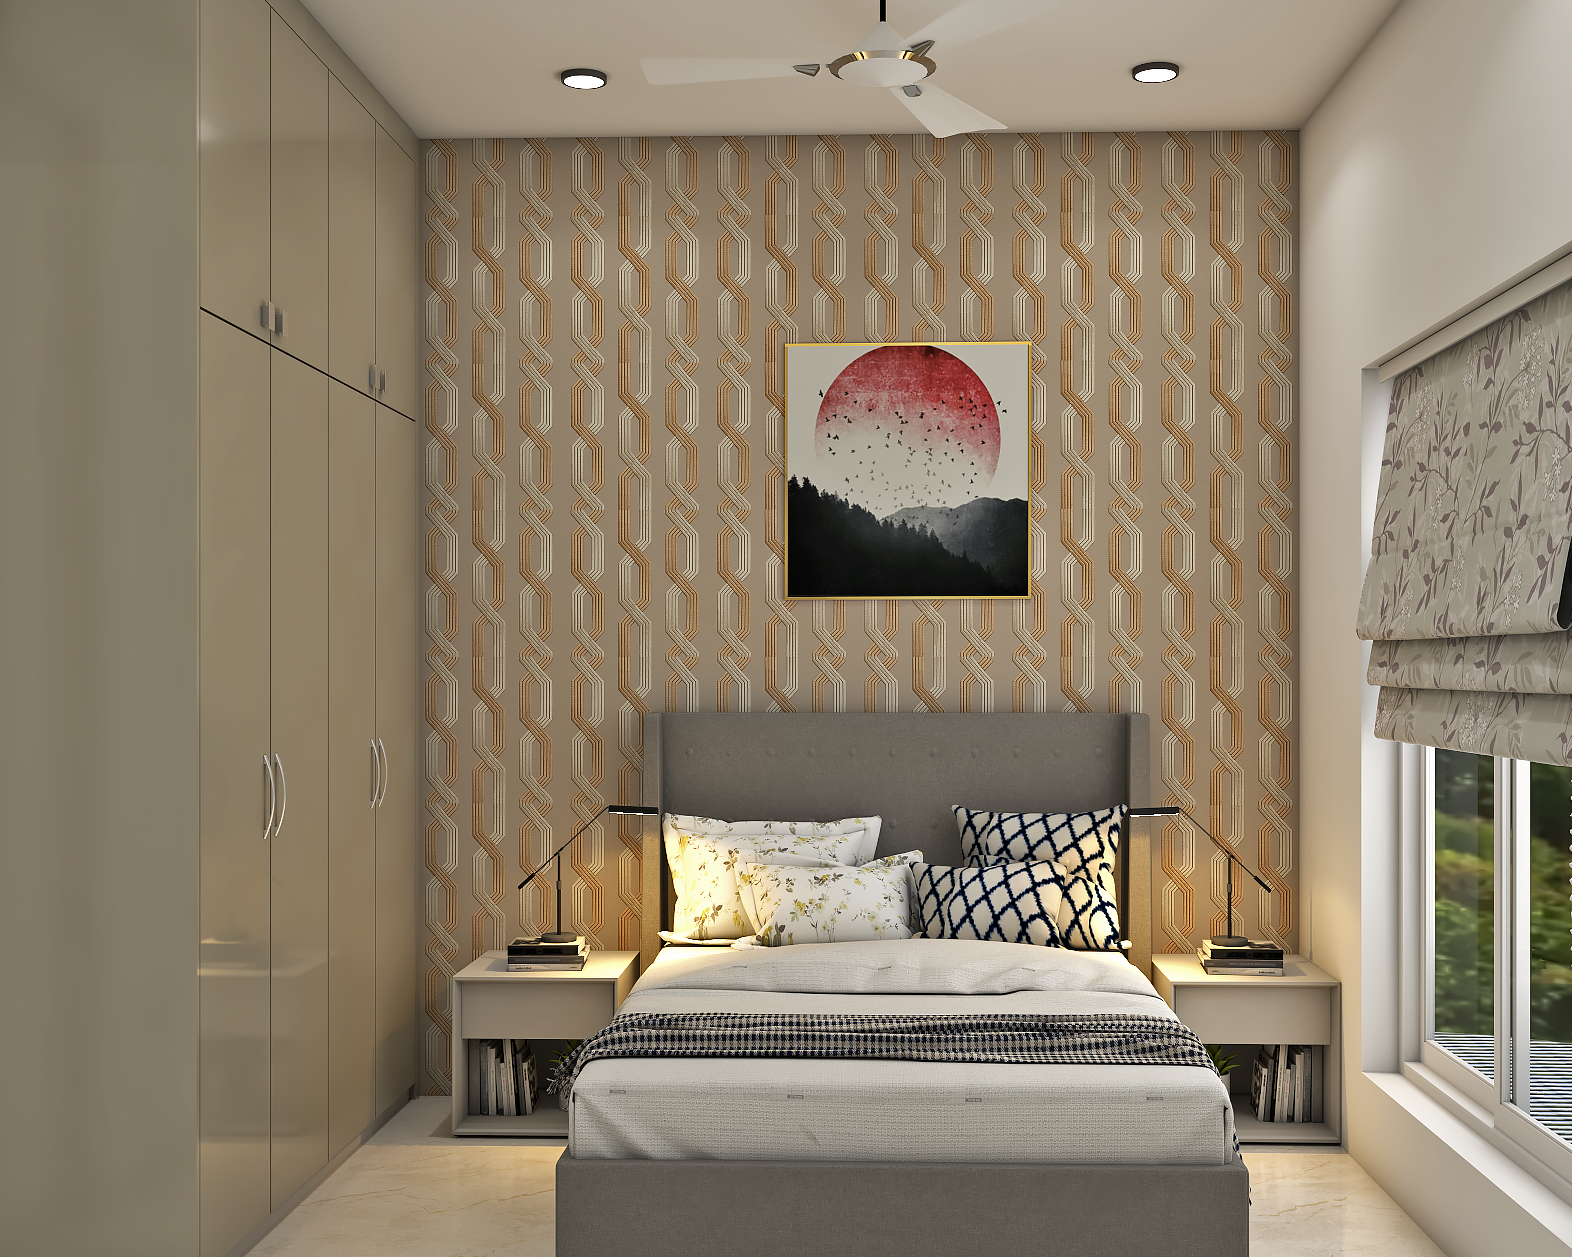 Contemporary Guest Bedroom Design With Patterned Wallpaper